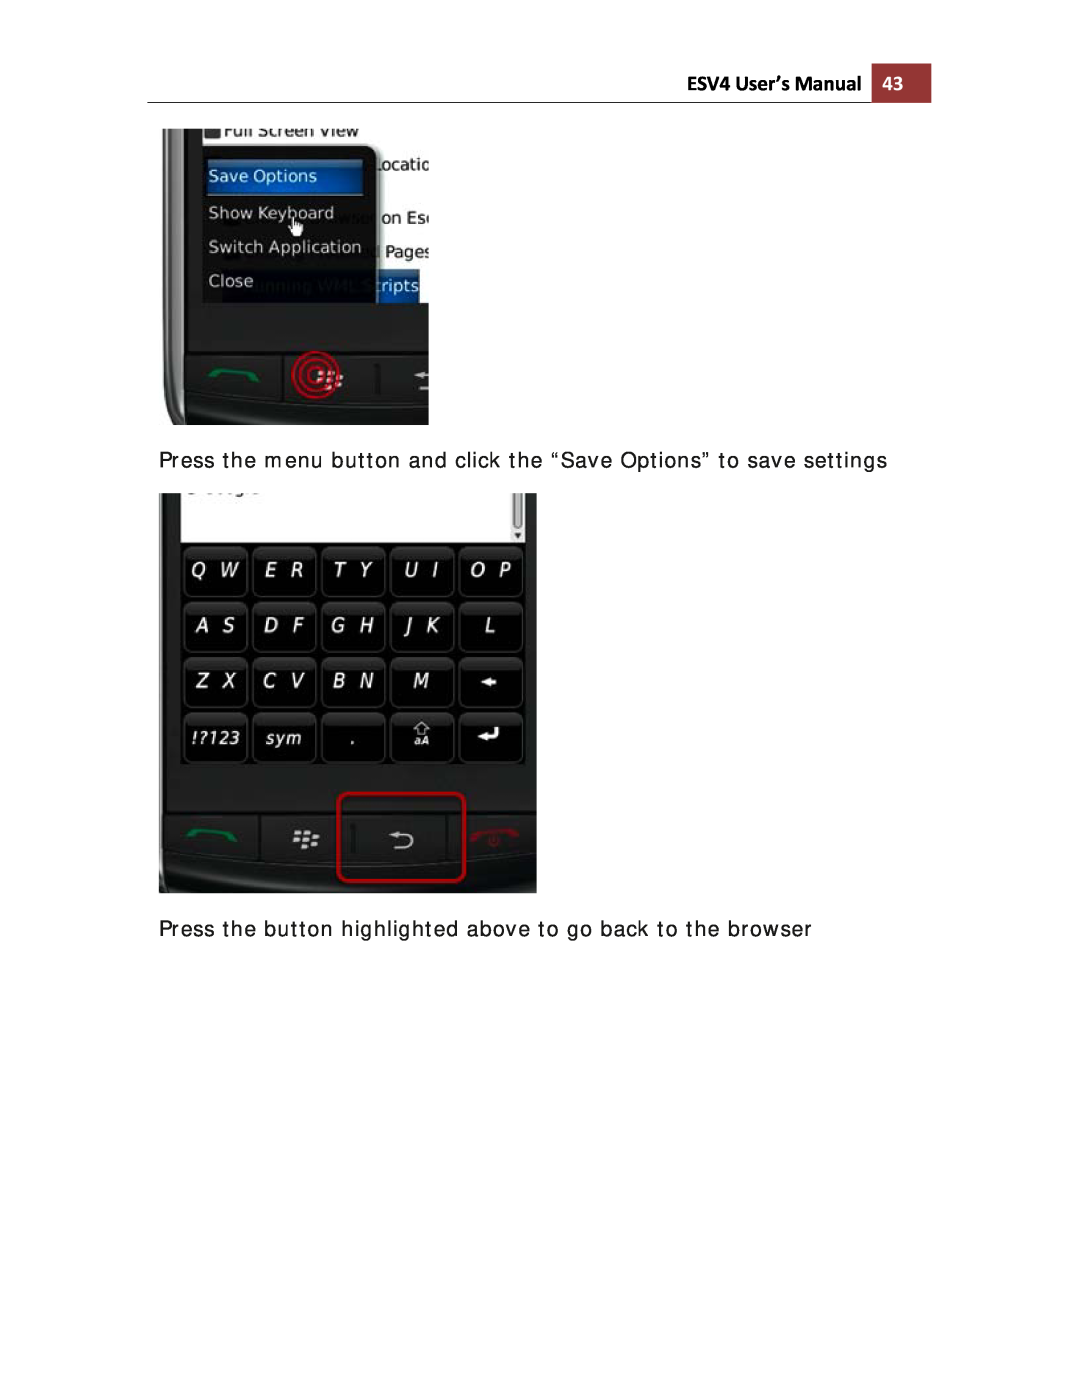 Toshiba ESV41T user manual ESV4 User’s Manual, Press the menu button and click the “Save Options” to save settings 